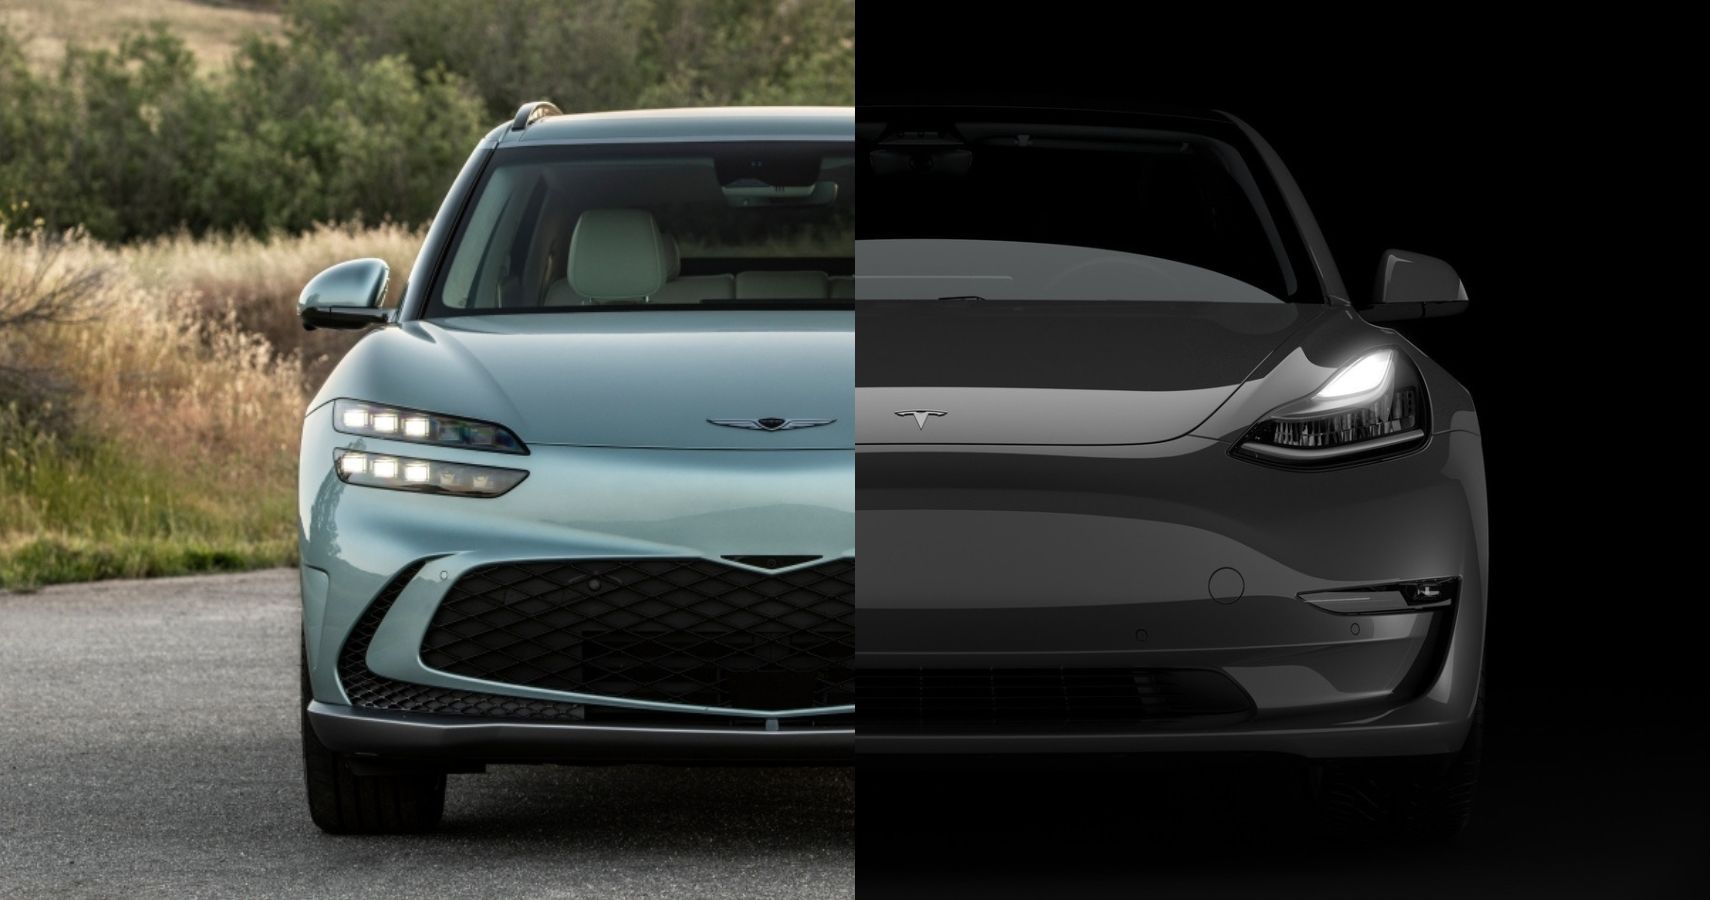 2023 Genesis GV60 and Tesla Model 3 front fascia side-by-side comparison